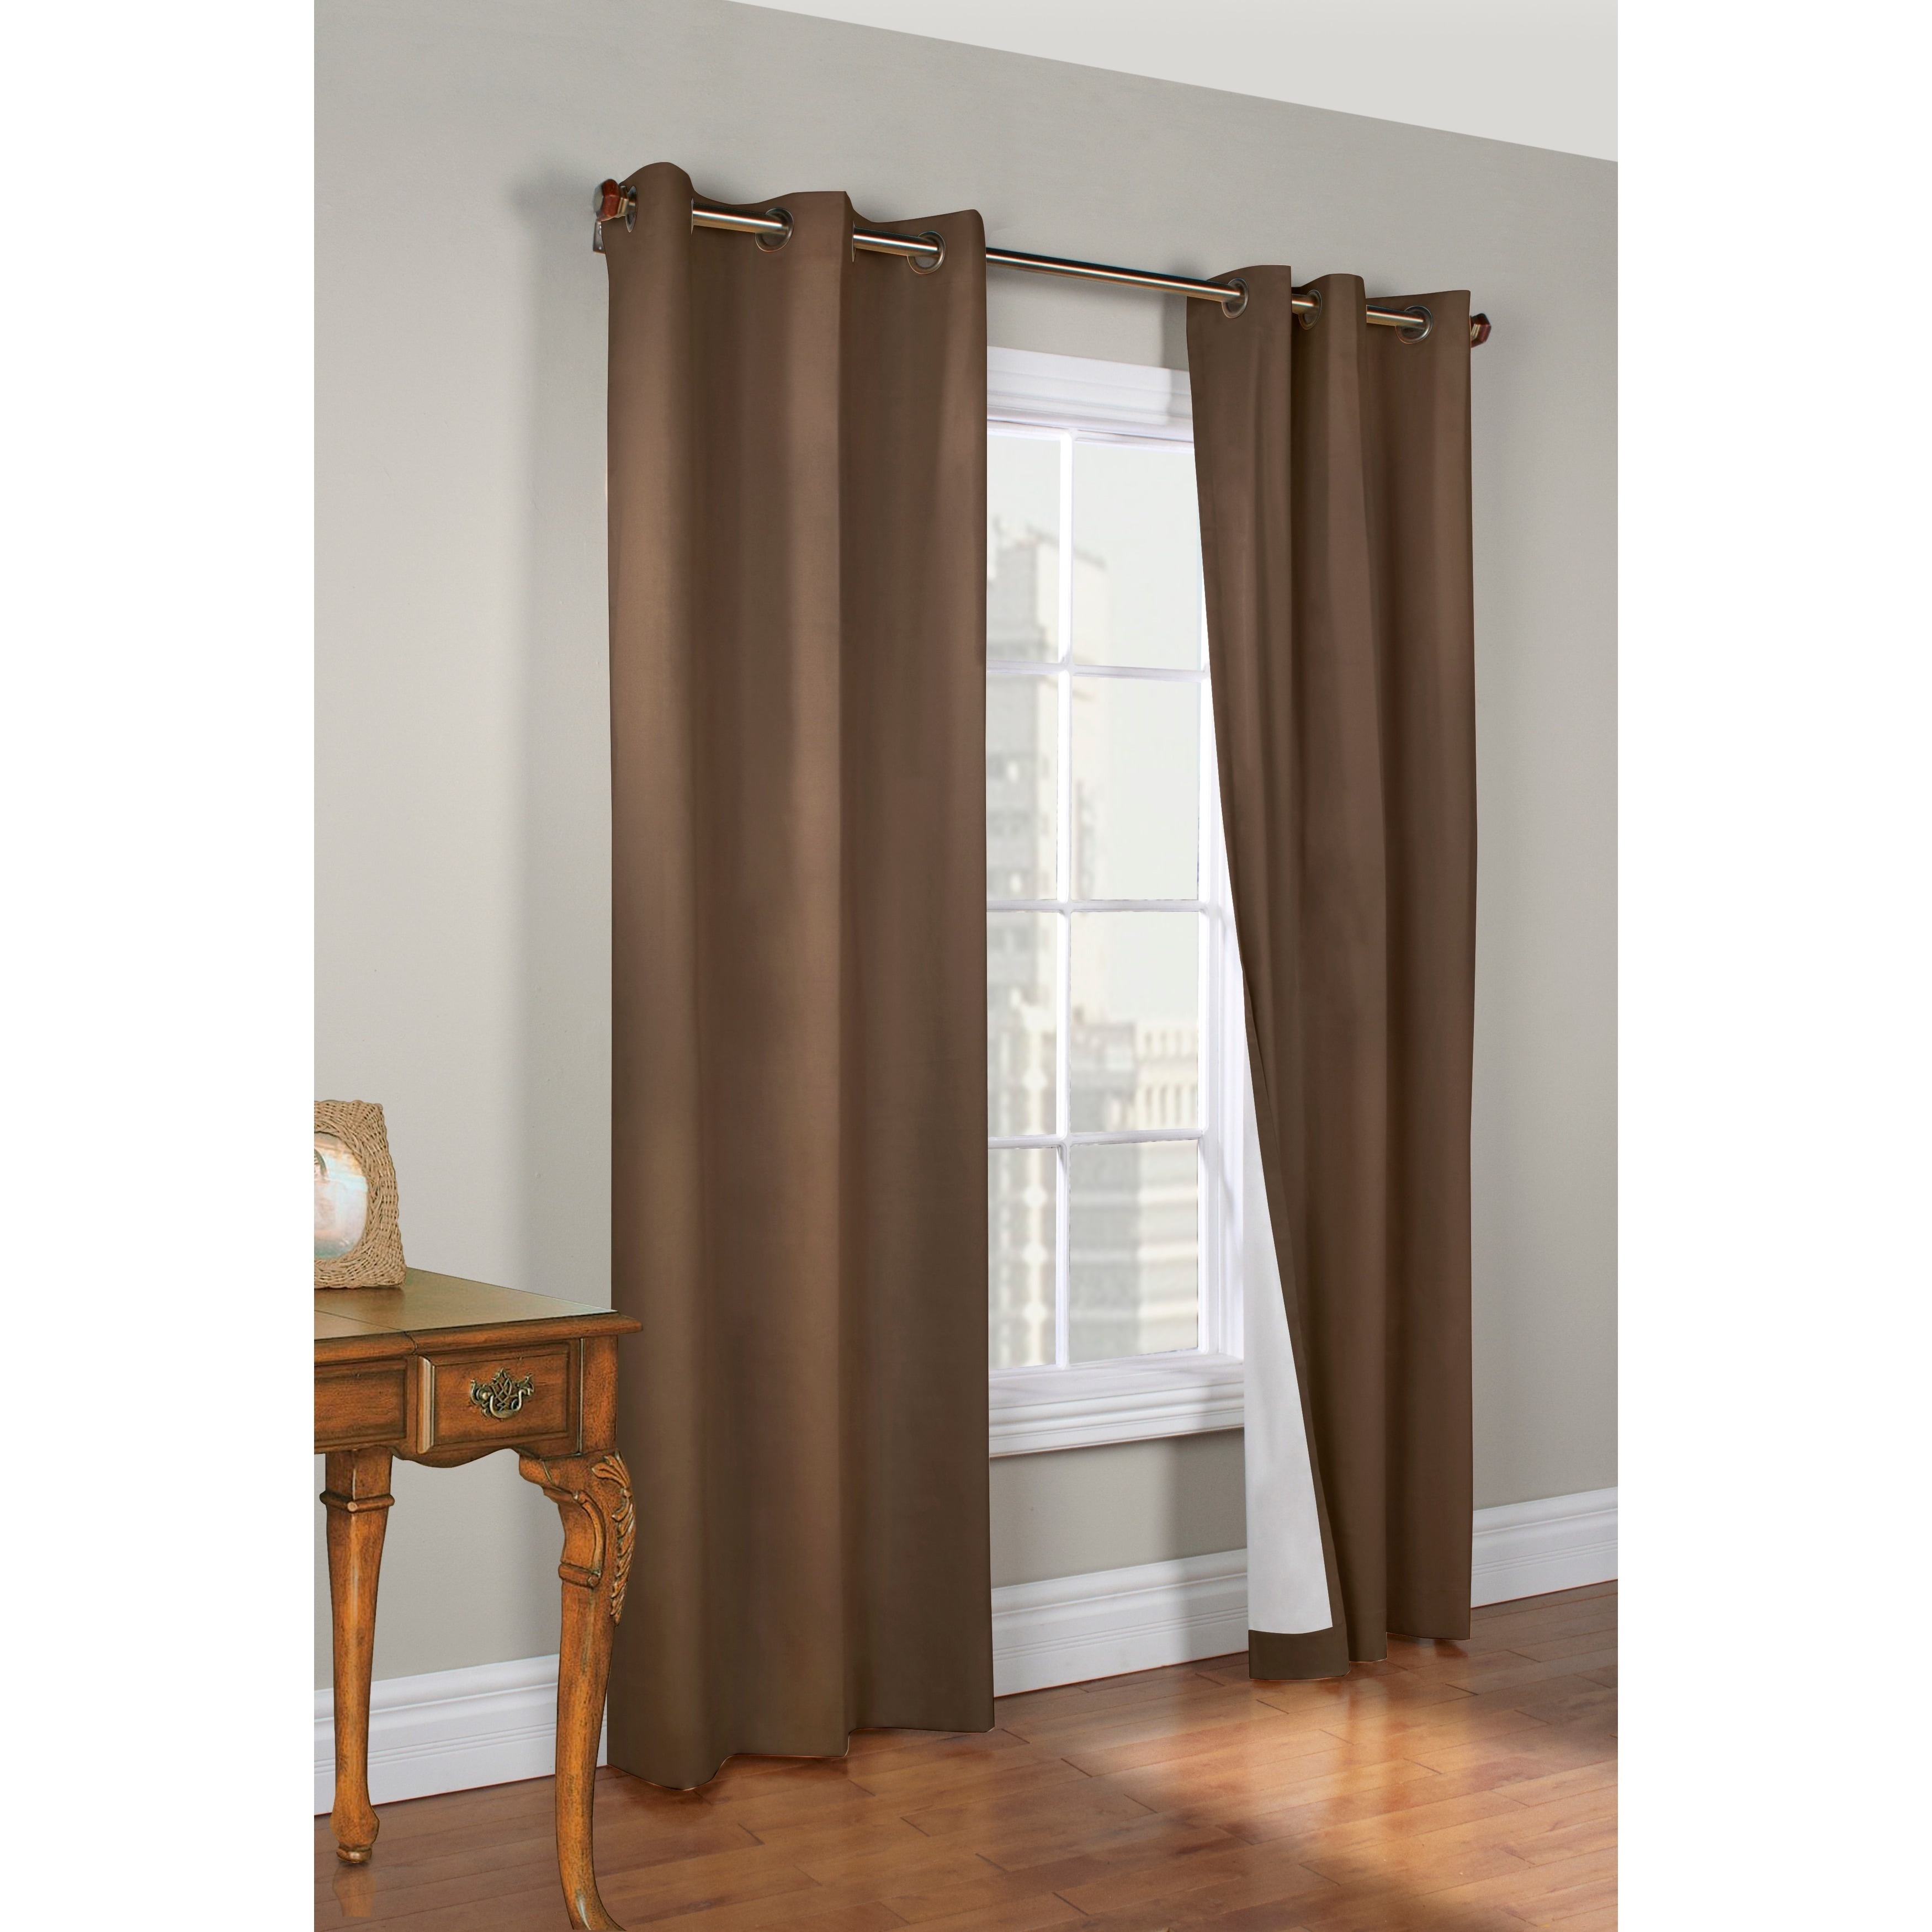 Blackout Insulated Curtain Liner Thermalogic Ultimate Liner for an 84" panel 